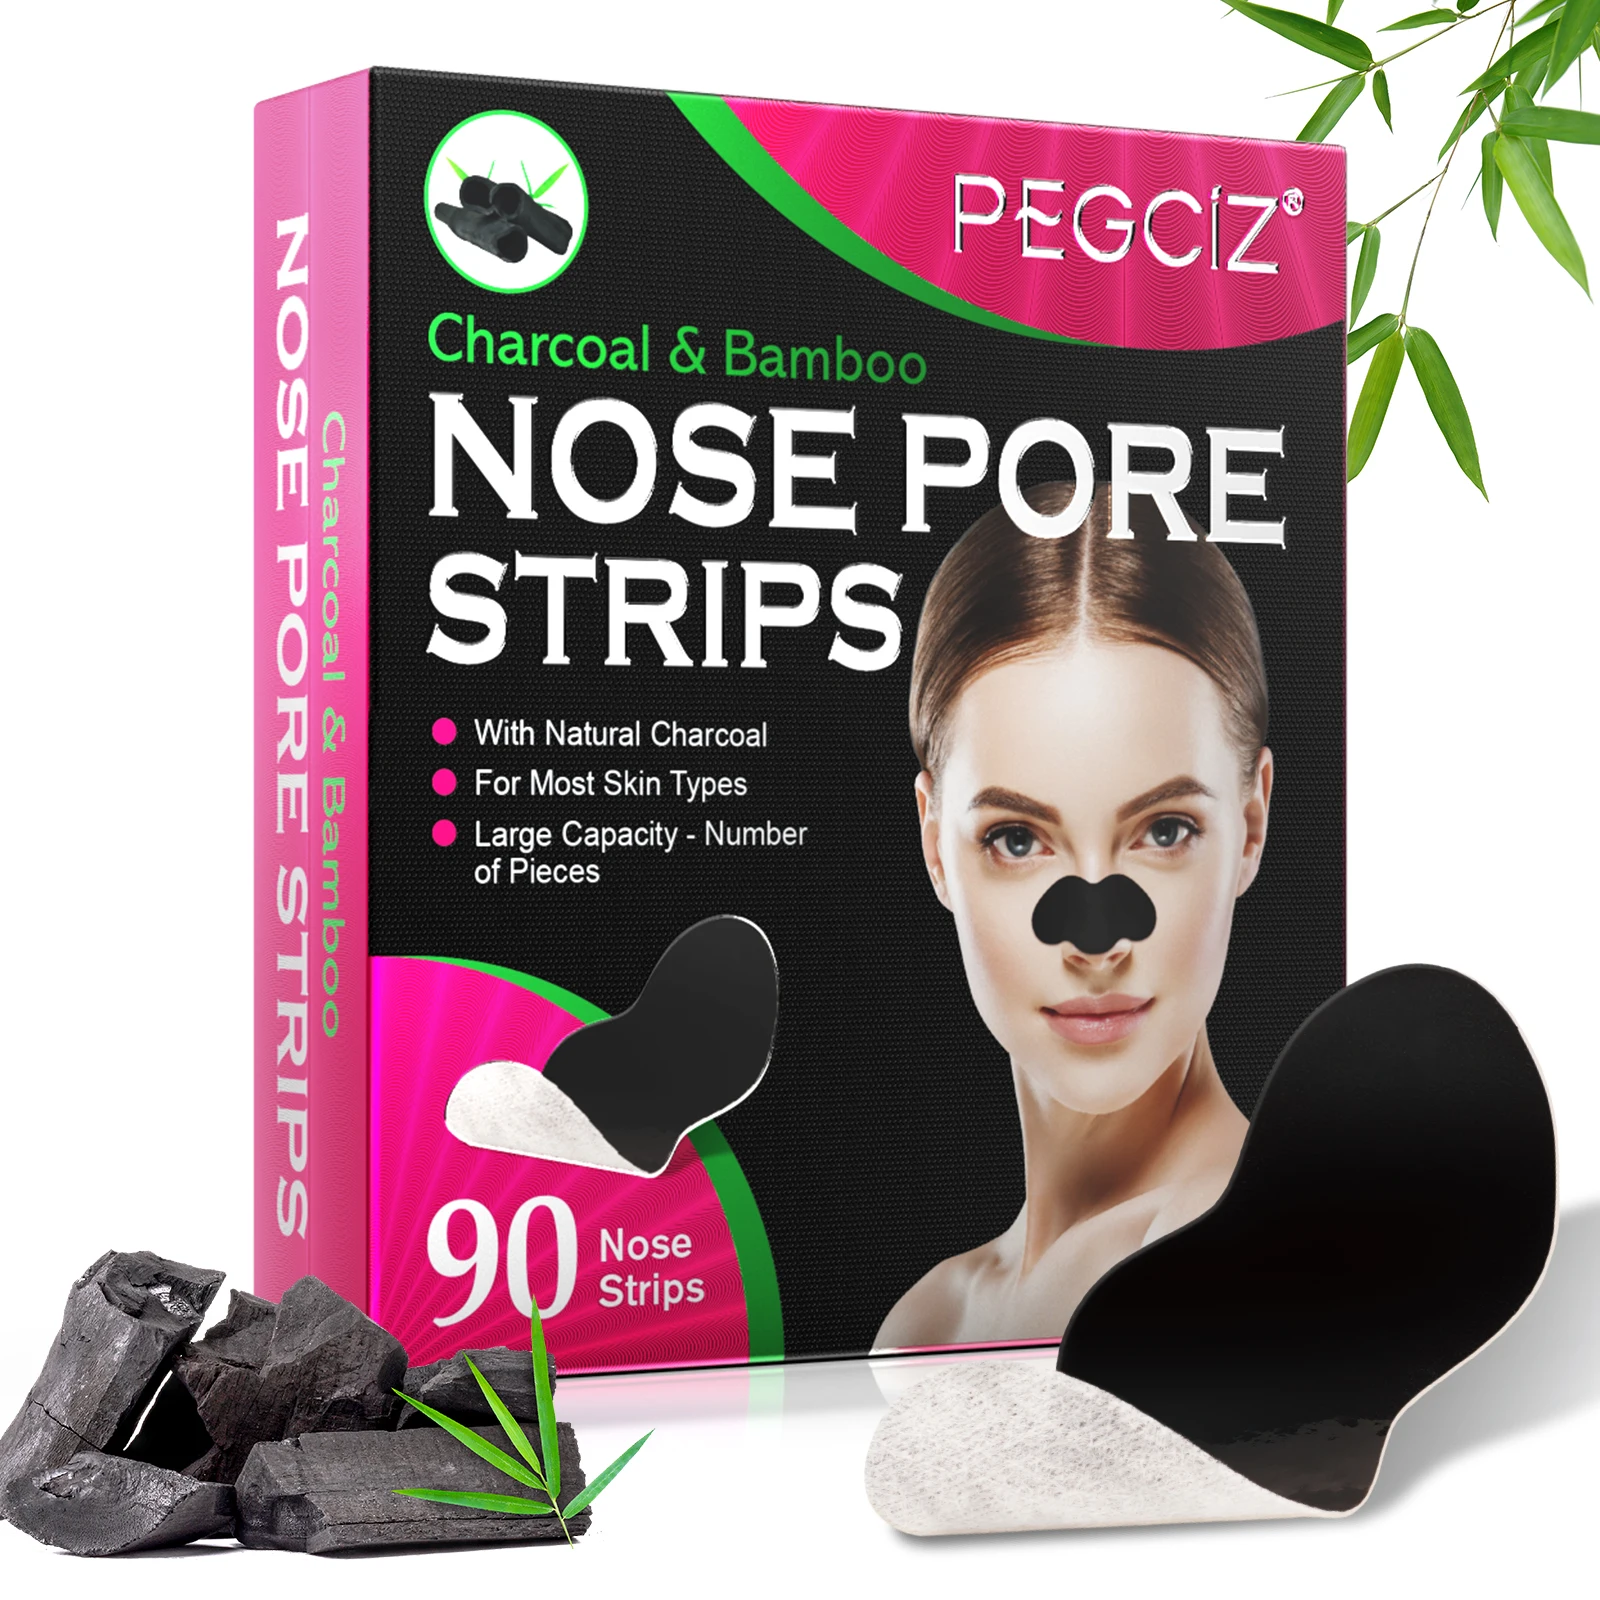 

Organic Charcoal Bamboo Blackhead Removal Nose Pore Strips Deep Cleansing Blackhead Aged Cutin Peel Off Black Nose Strips